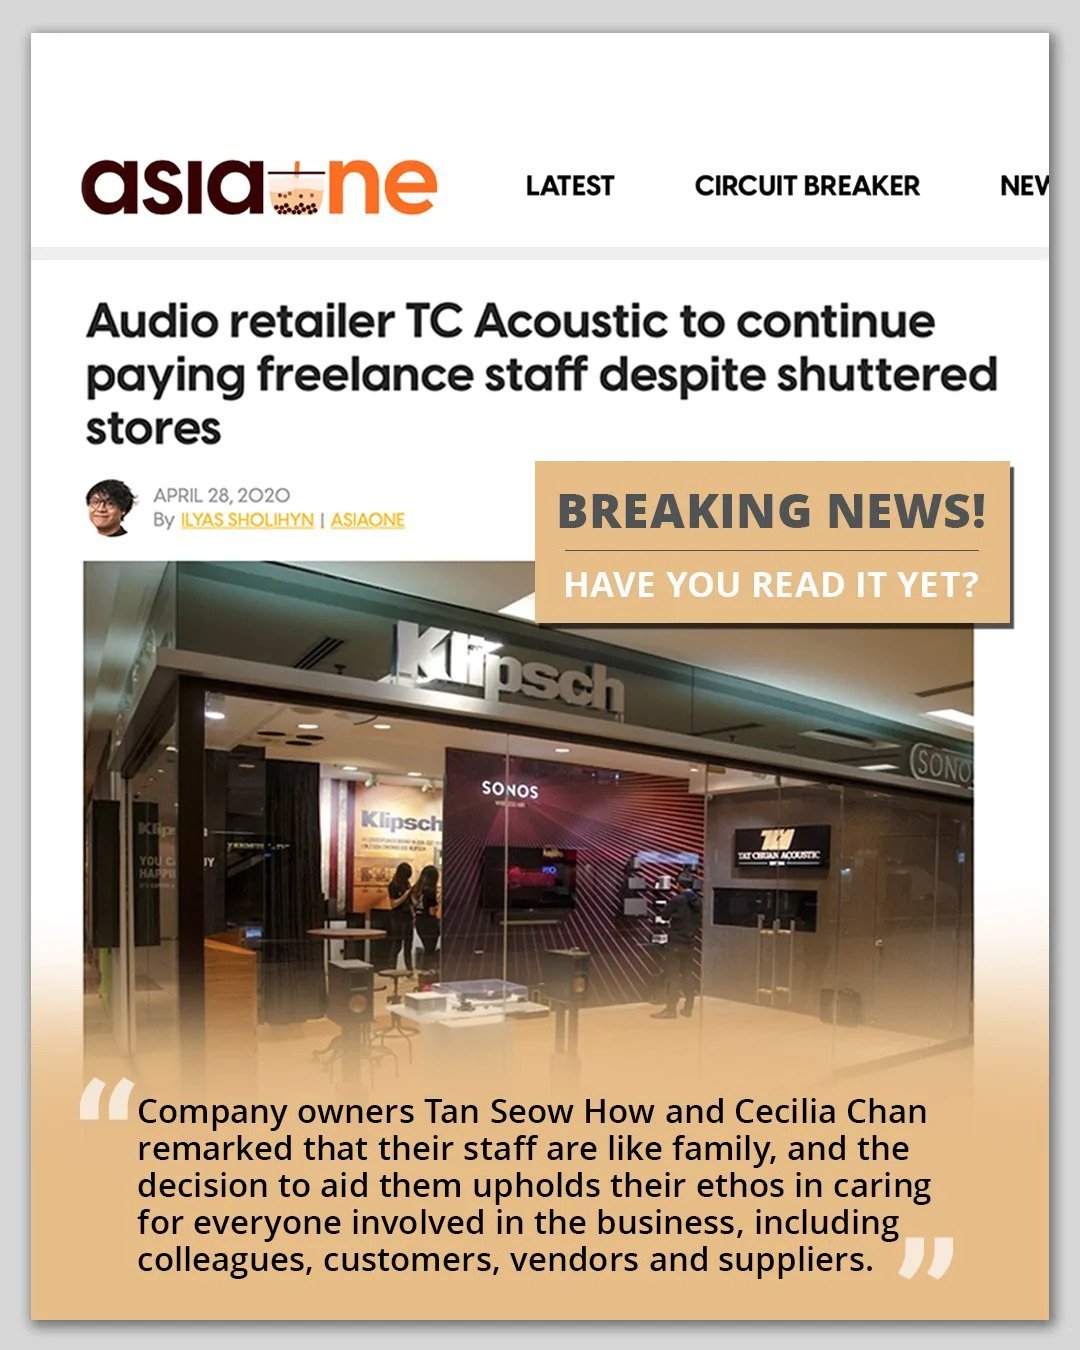 #TCcares featured on AsiaOne News Article